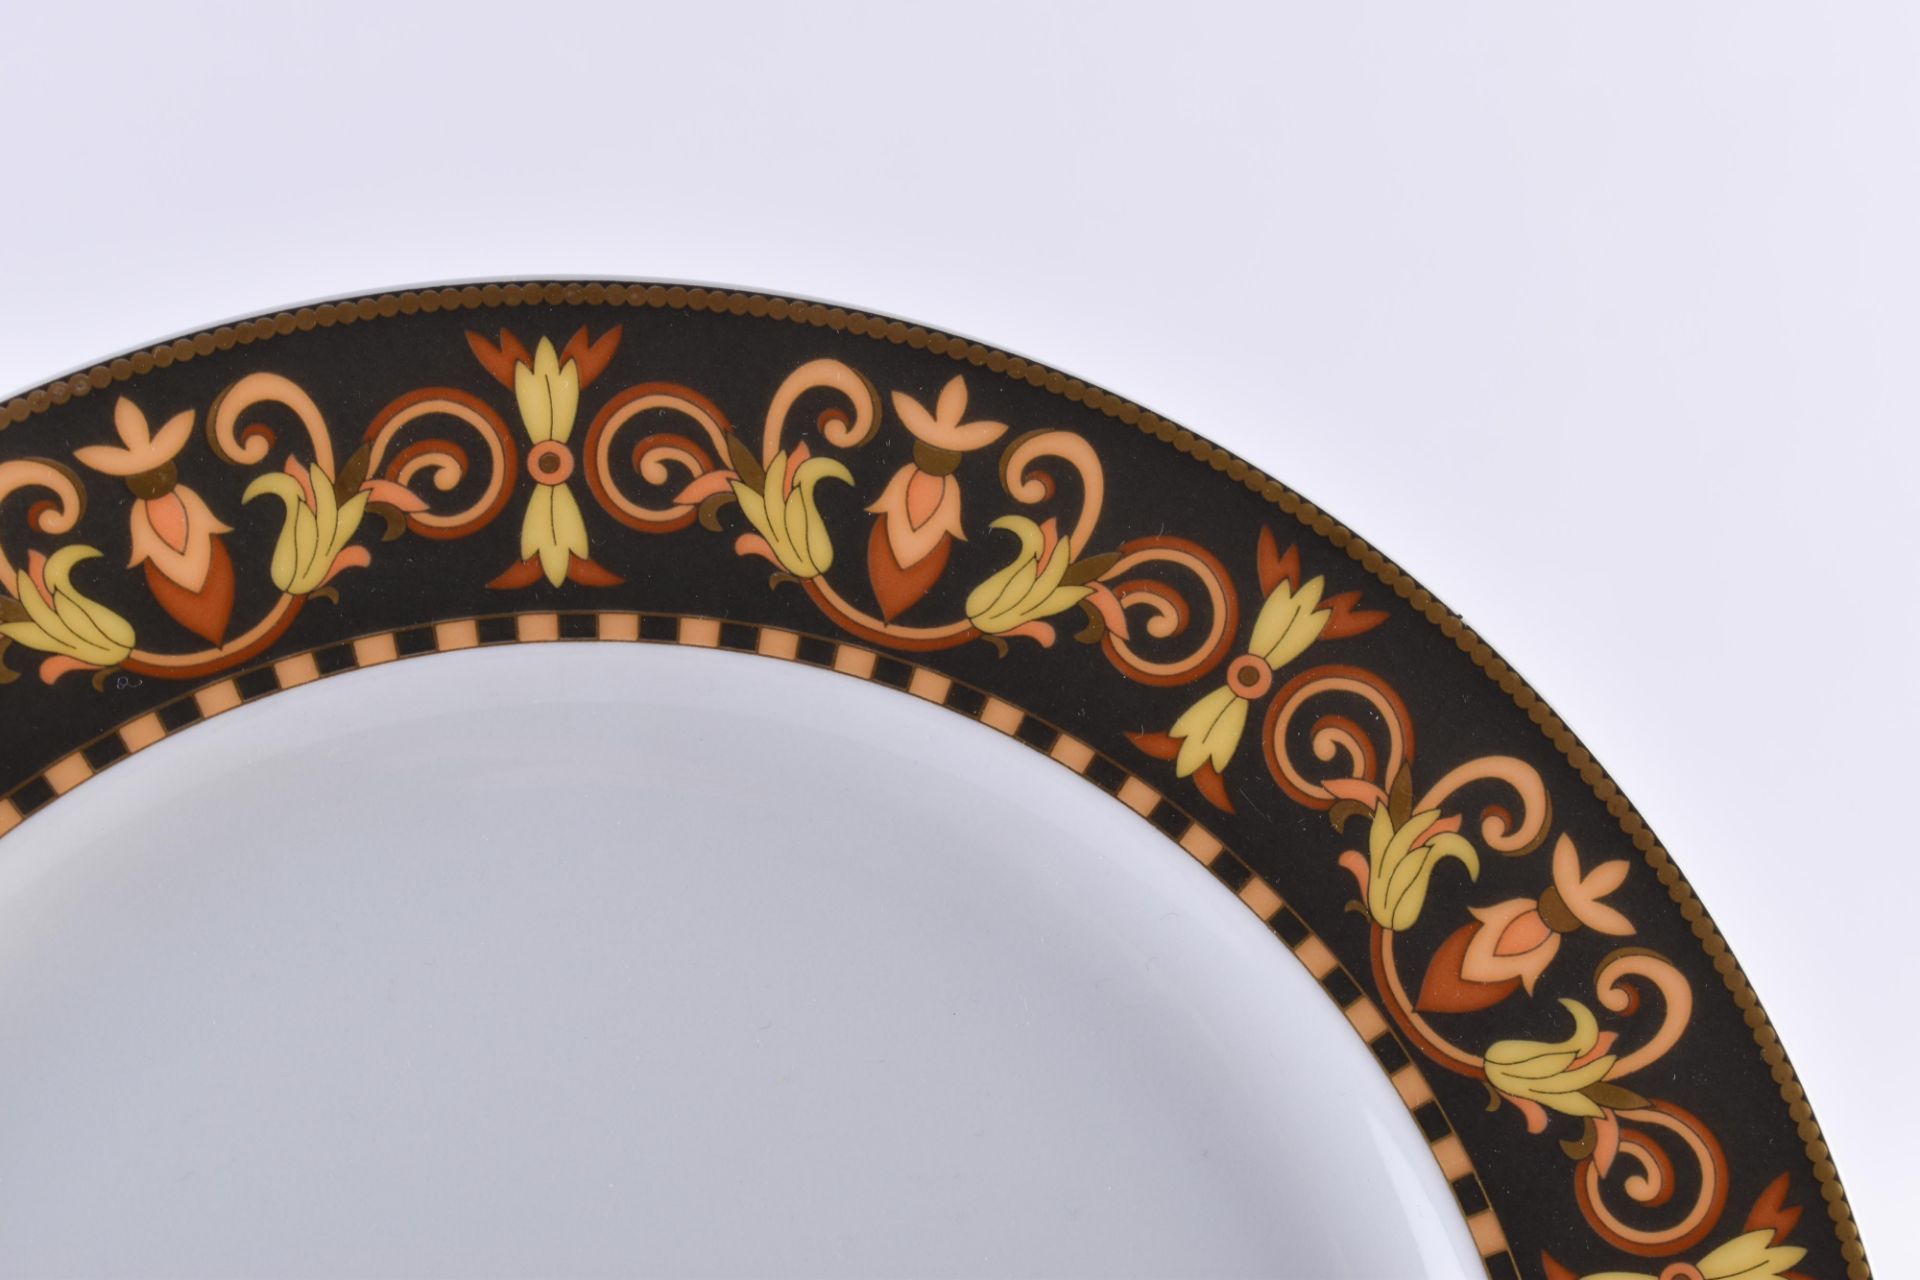 6 dinner plates Rosenthal Versace Barocco  - Image 2 of 3